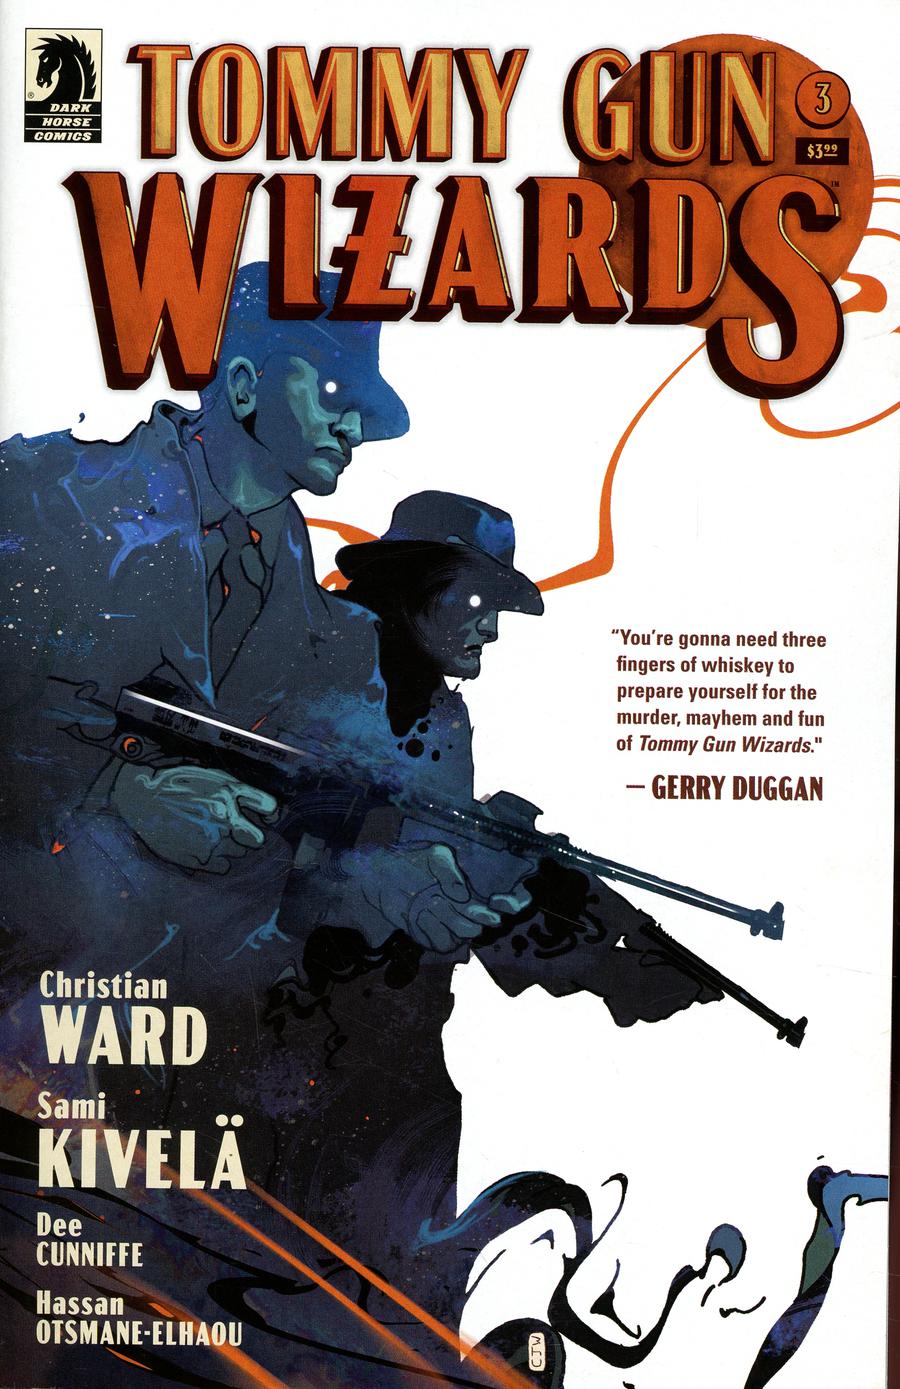 Tommy Gun Wizards #3 Cover A Regular Christian Ward Cover